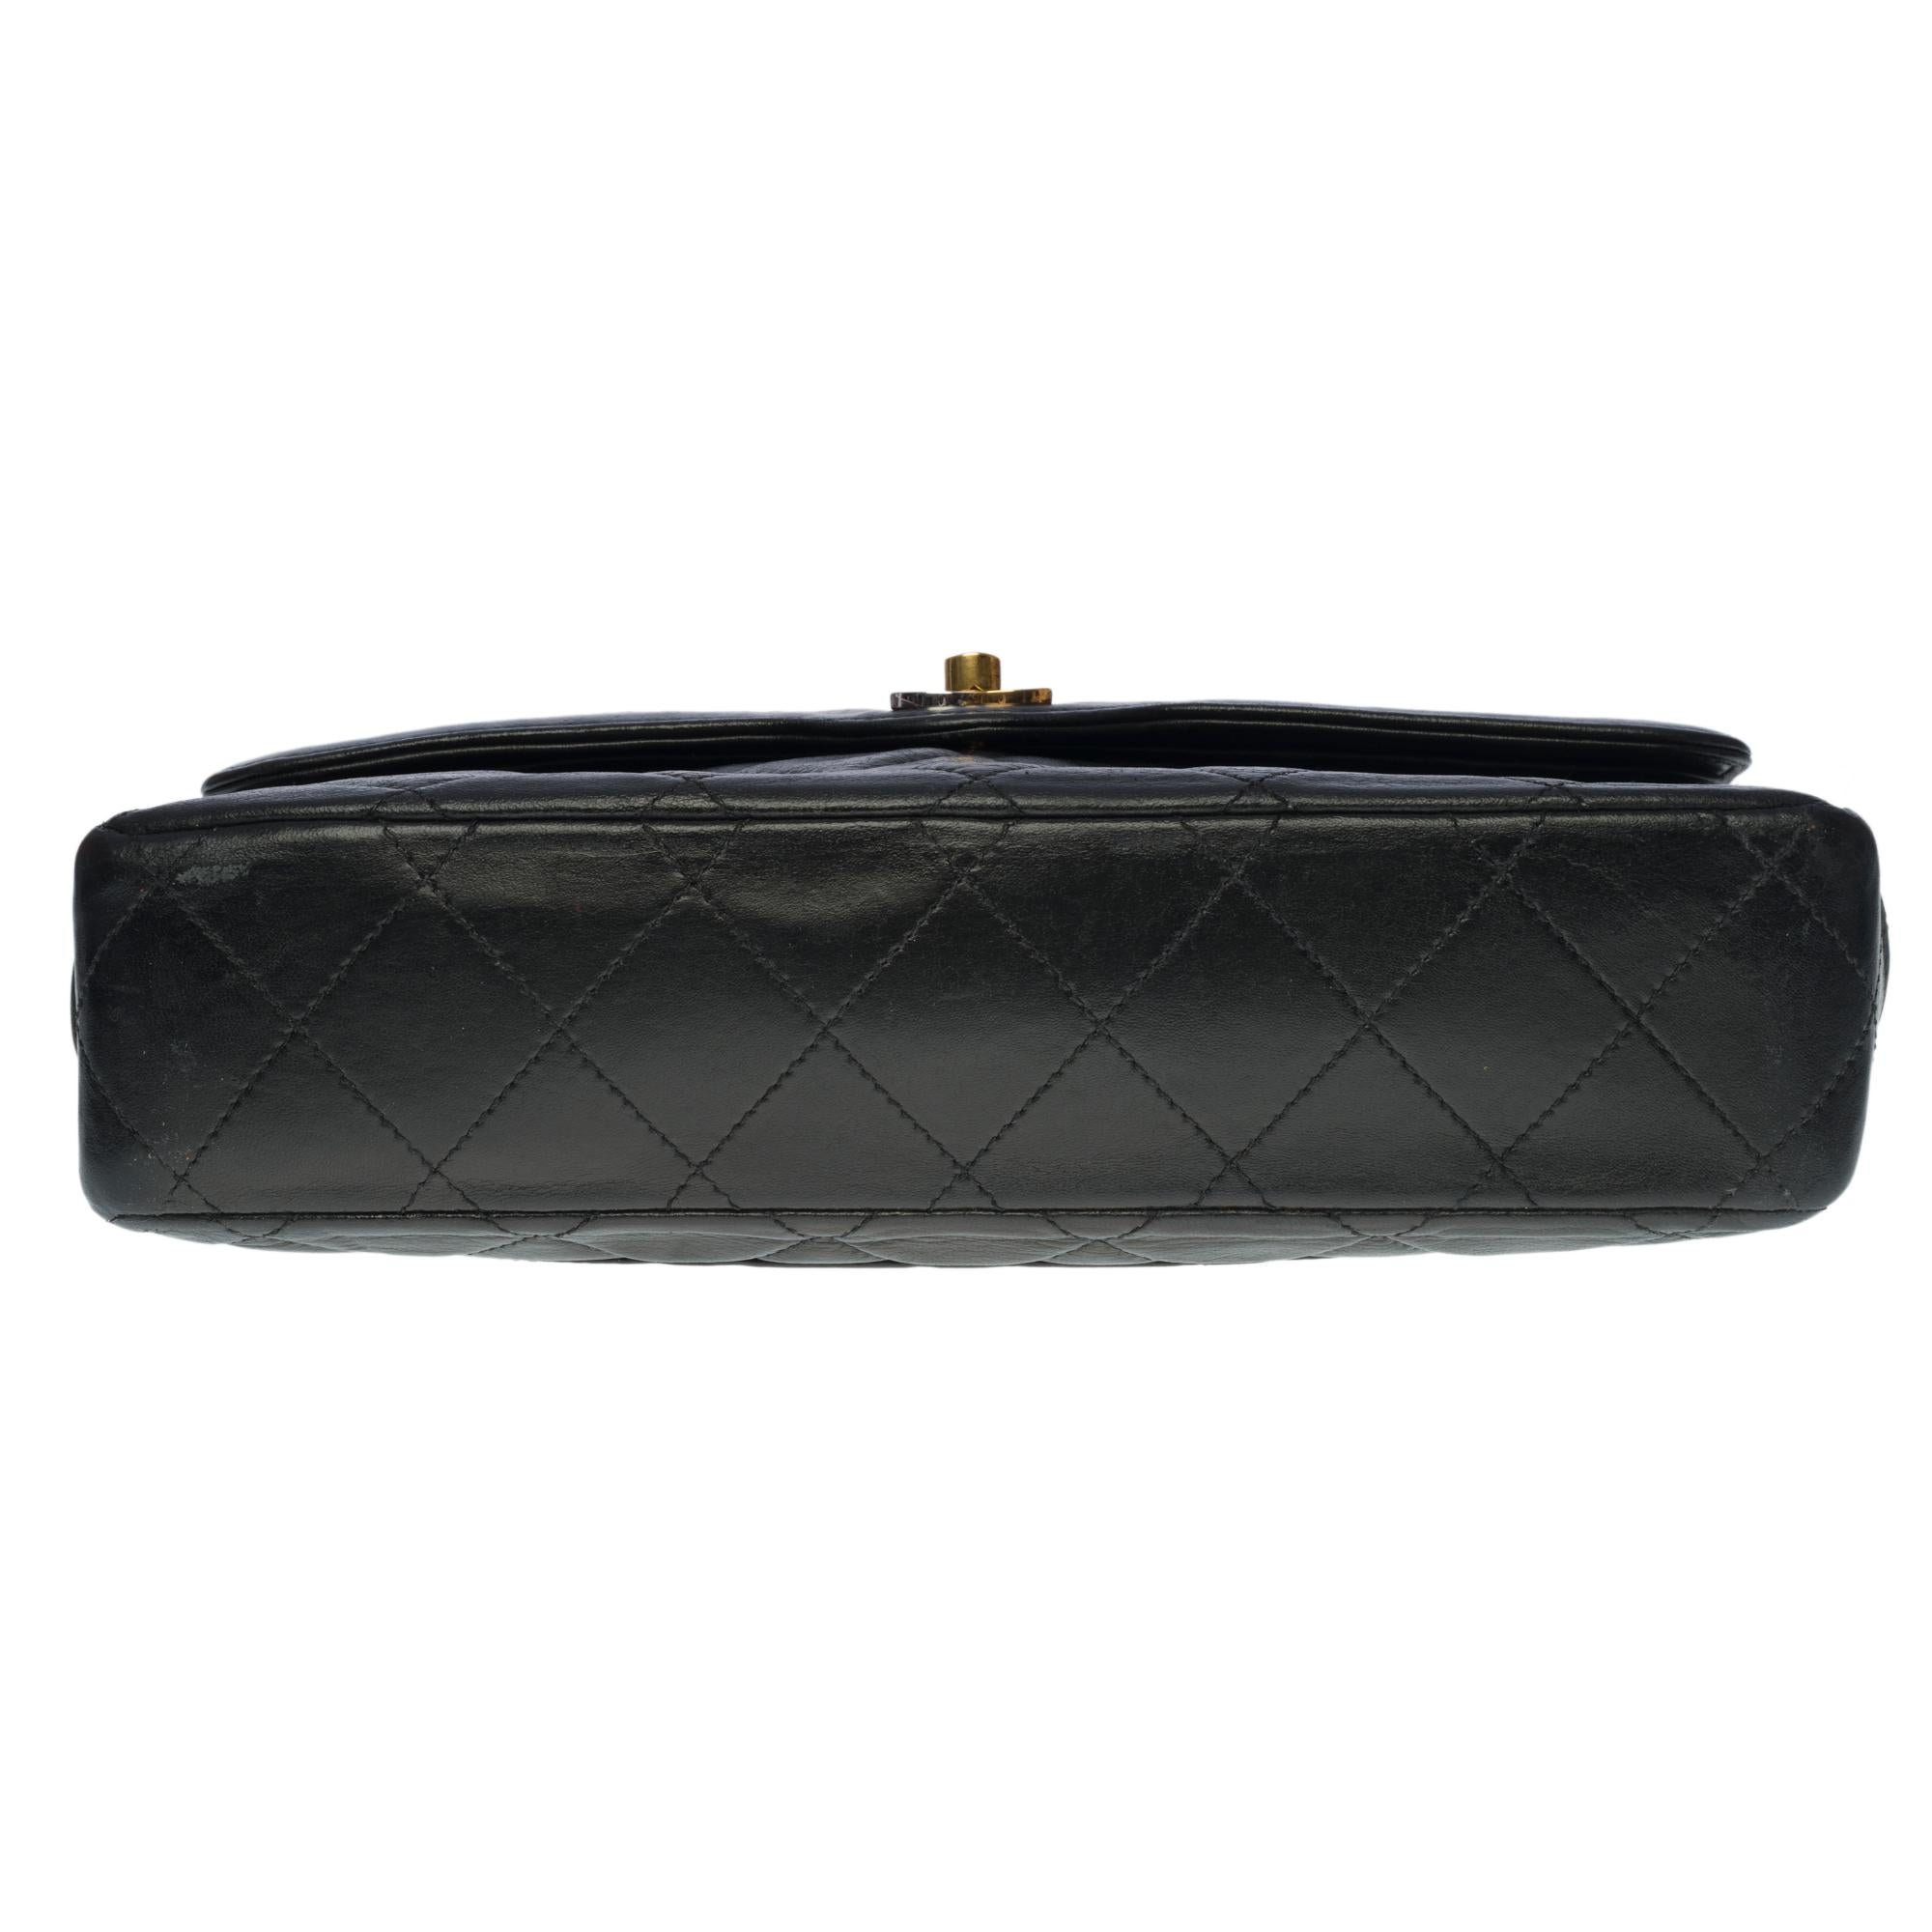 Amazing Chanel Classic Double flap shoulder bag in black quilted lambskin, GHW For Sale 2